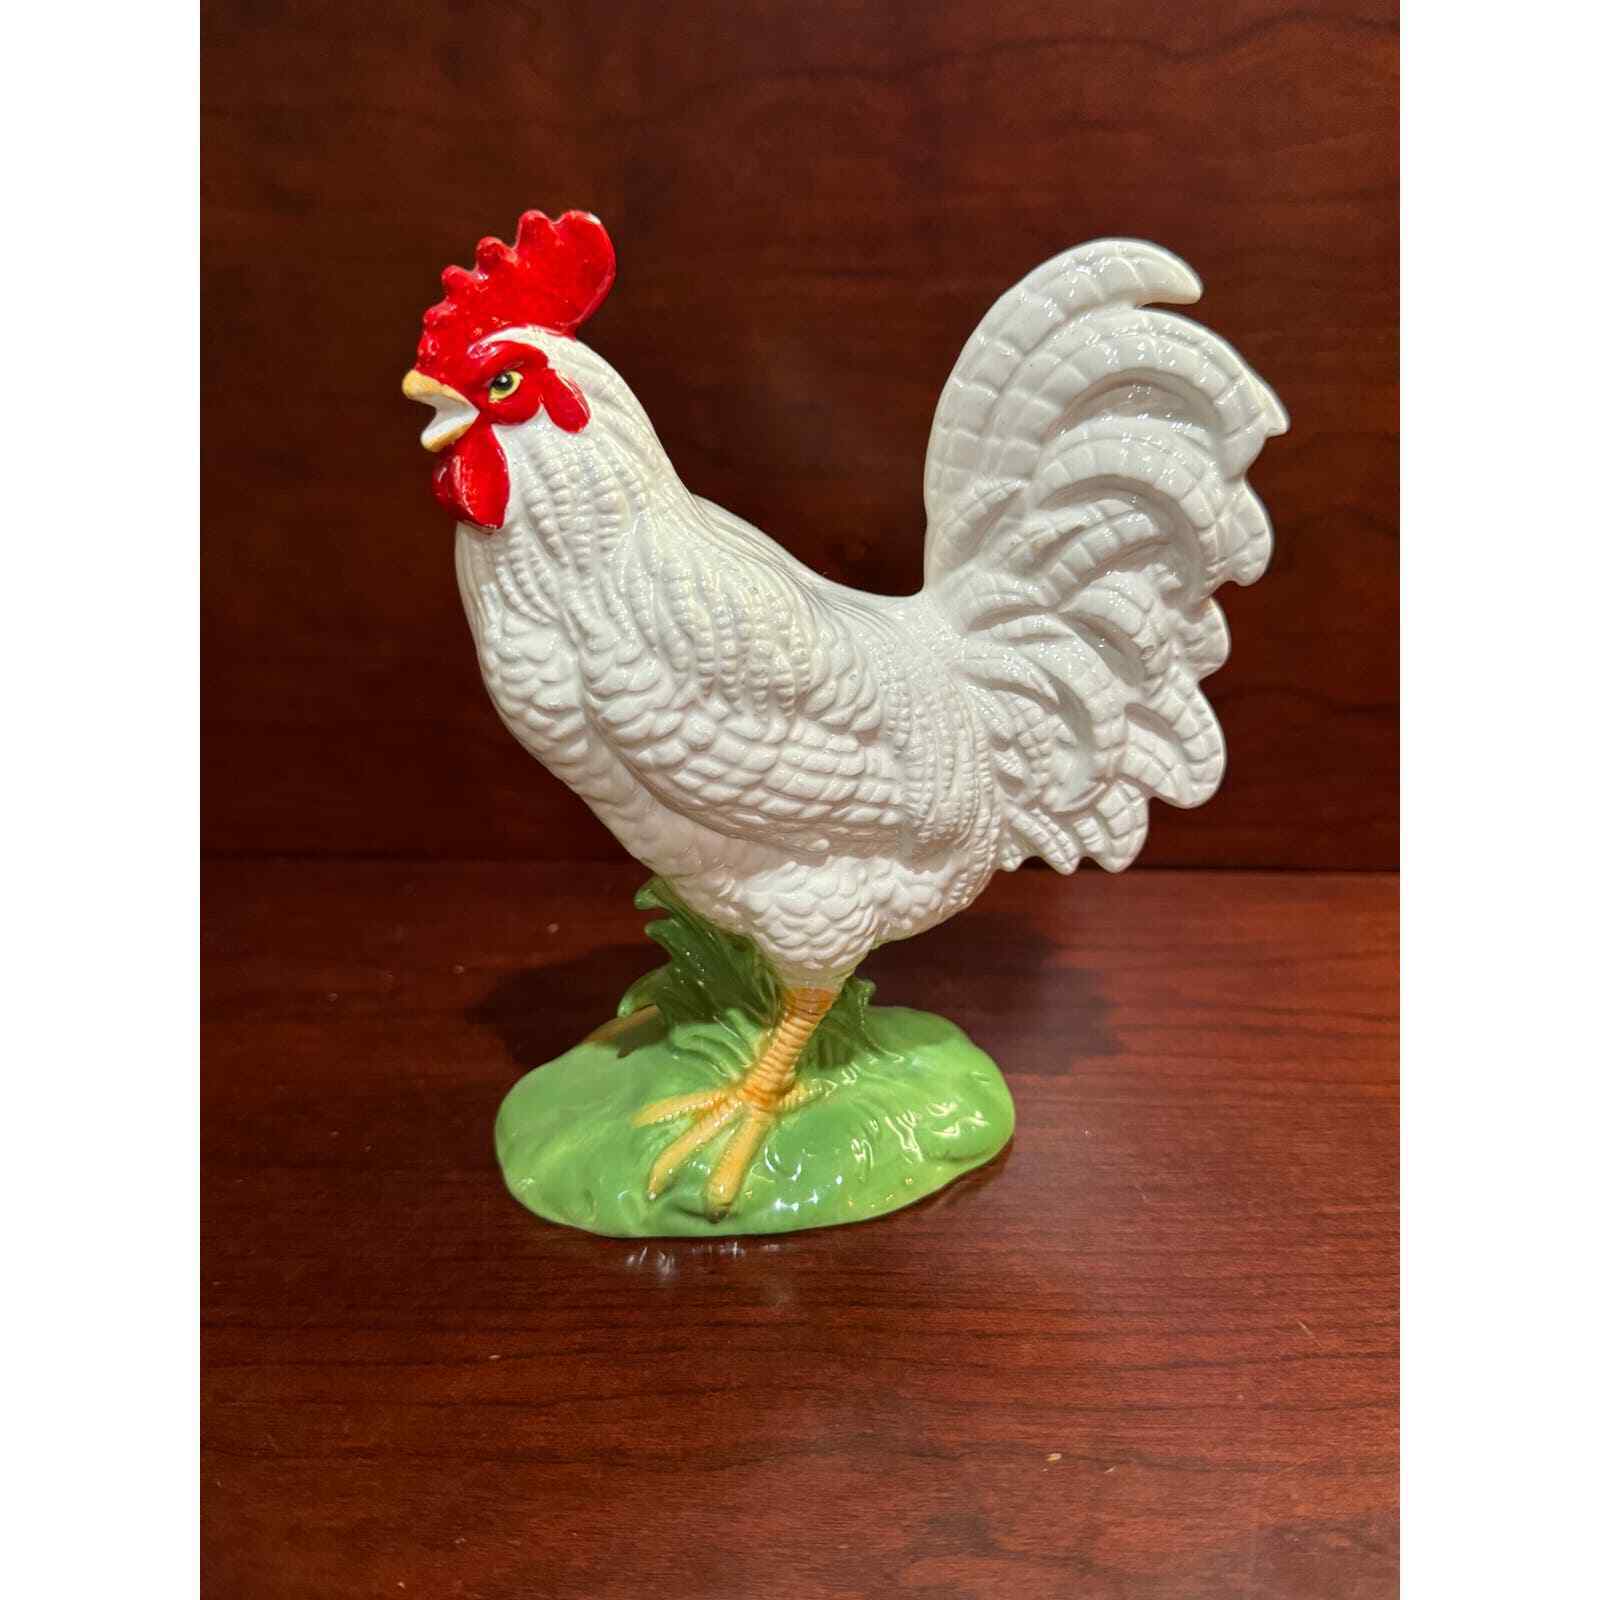 Vintage Country Farmhouse Decorative White Glazed Ceramic Rooster Statue 